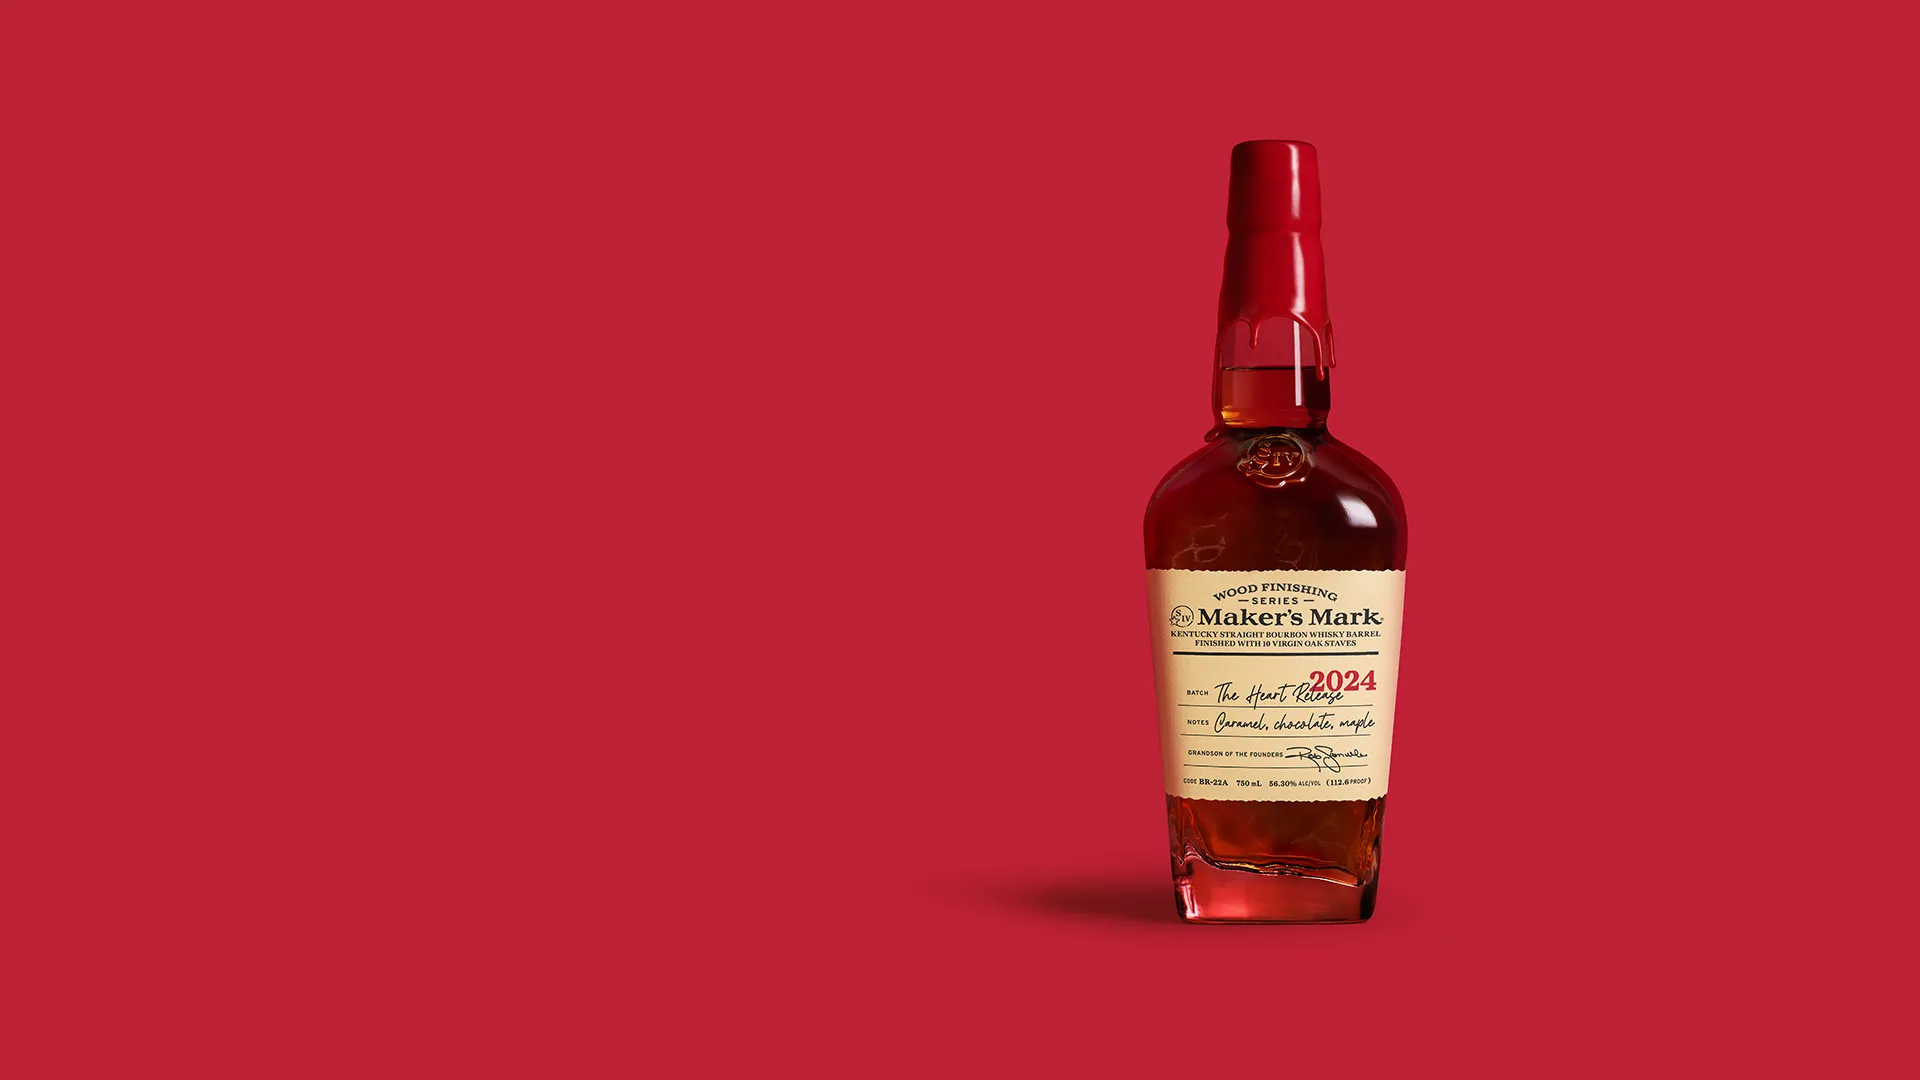 Maker’s Mark Announces Its Next Wood Finishing Series Release